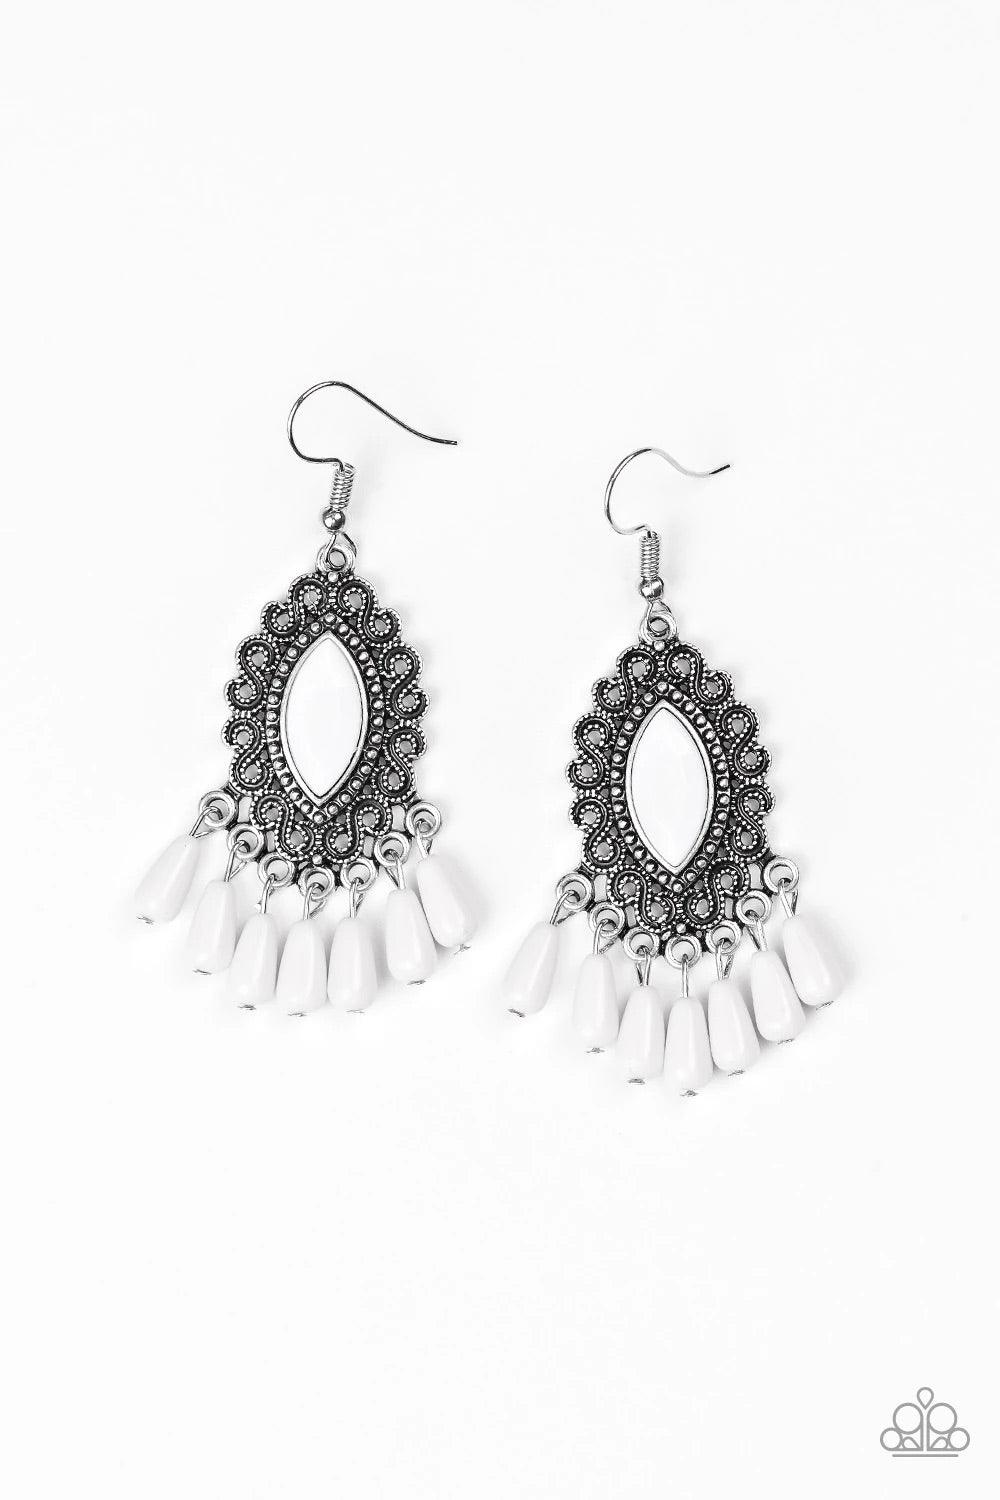 Paparazzi Accessories Private Villa - White A faceted white bead is pressed into the center of a studded silver frame radiating with antiqued filigree. Matching white beads swing from the bottom of the frame, creating a whimsical fringe. Earring attaches